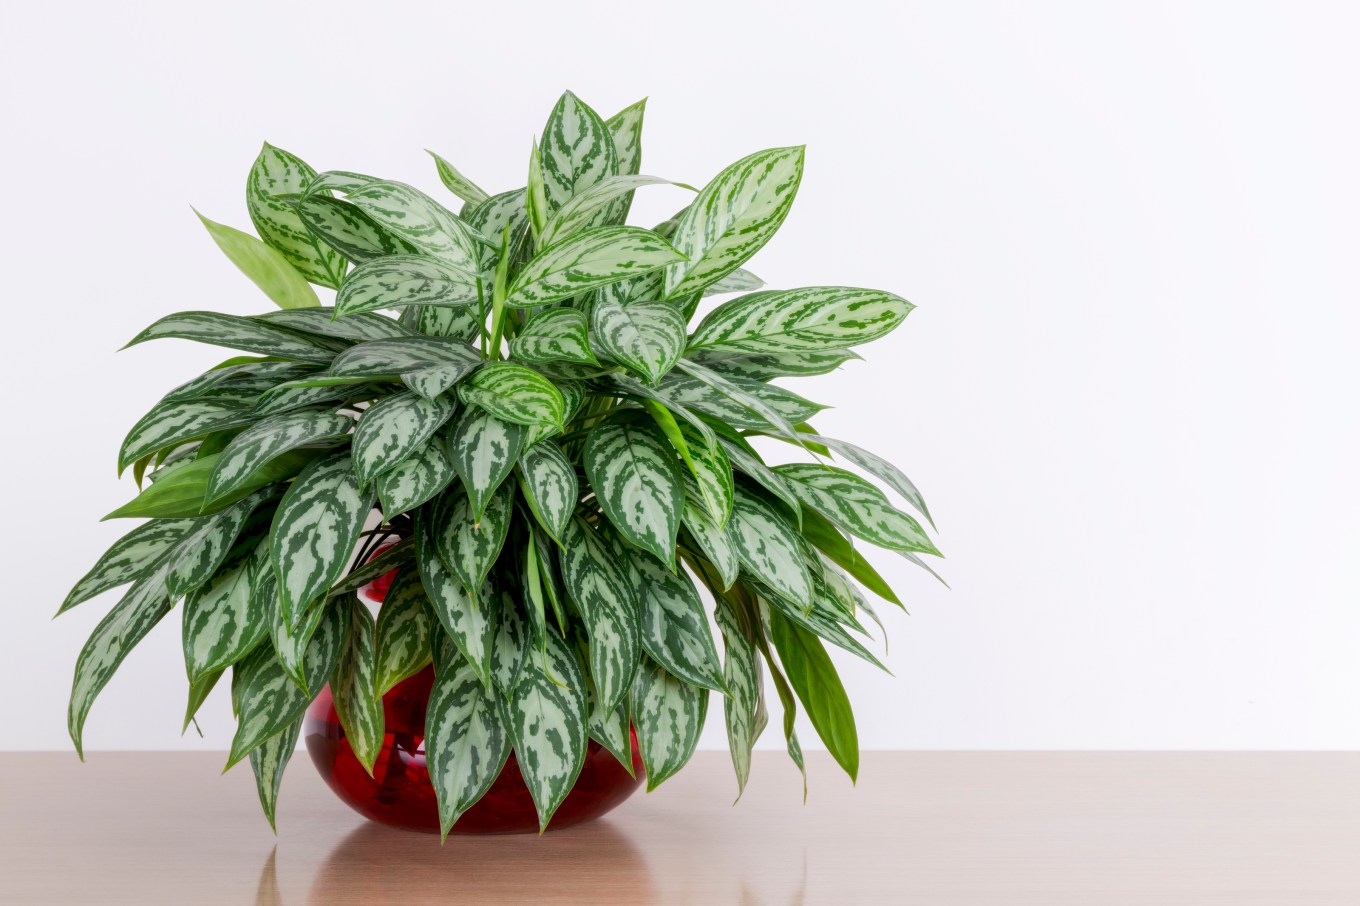 A Chinese Evergreen, Aglaonema modestum, houseplant in a red vase.